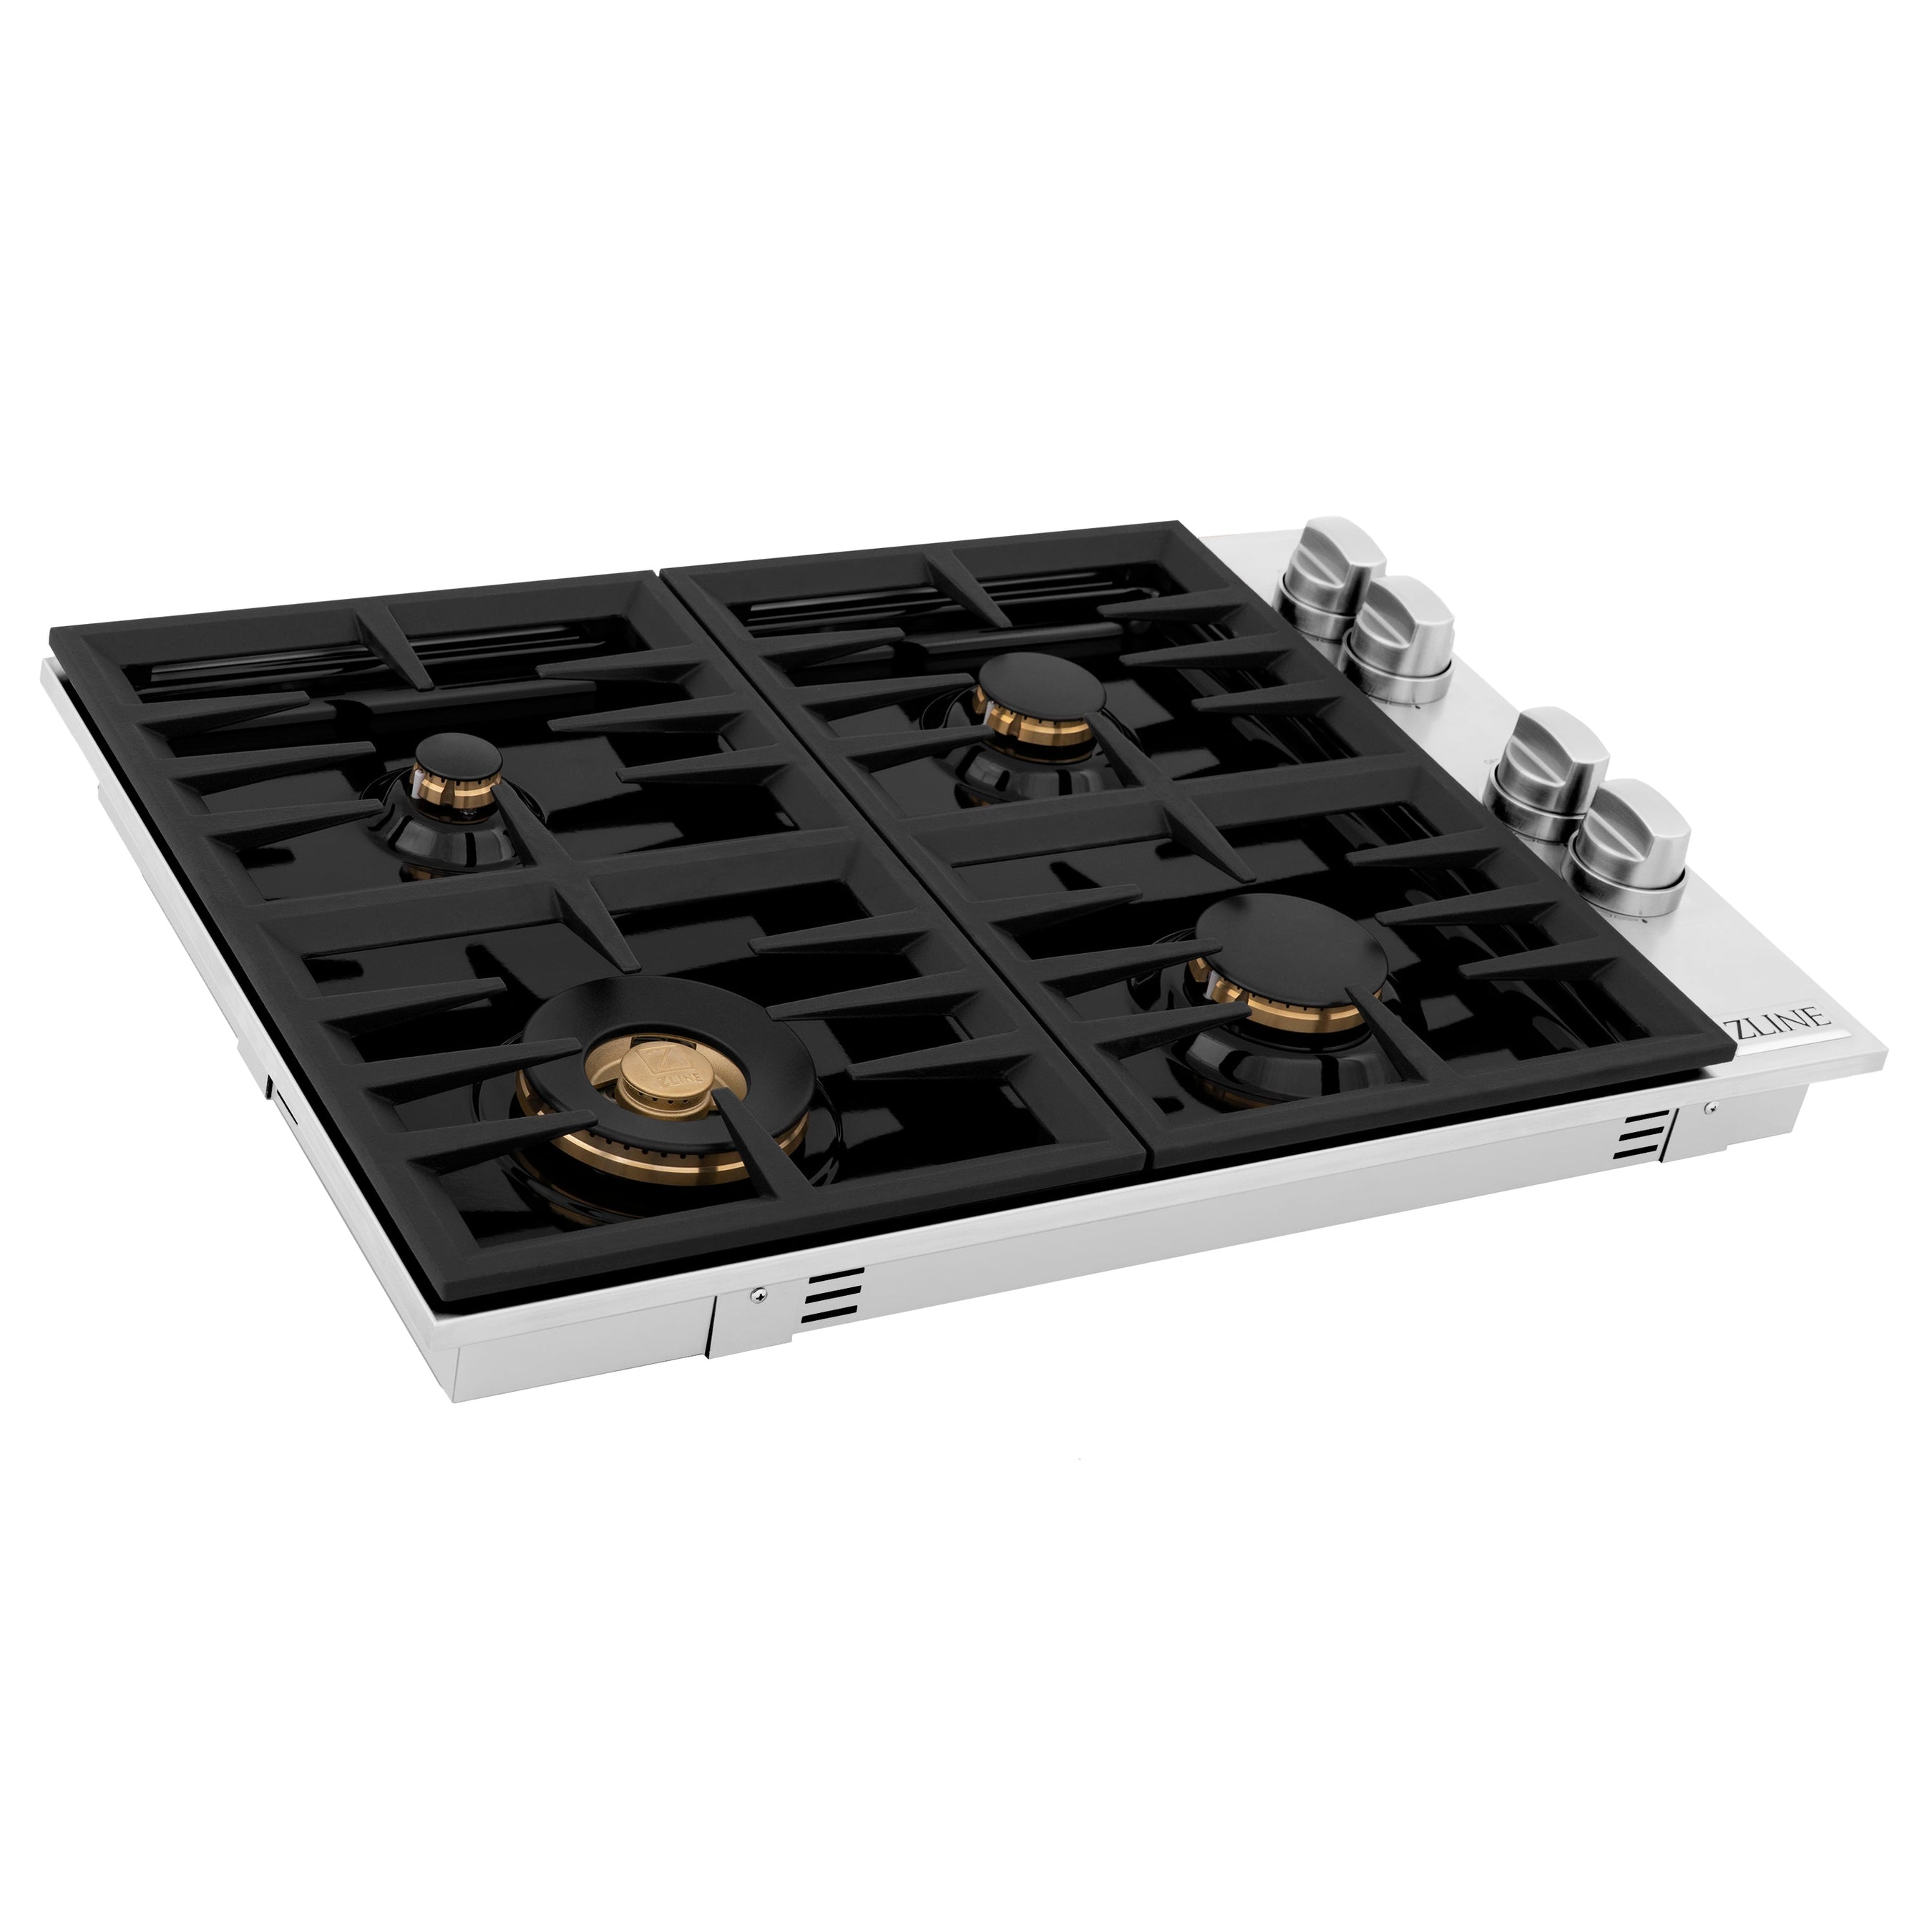 ZLINE 30" Drop-in Gas Stovetop with 4 Gas Burners and Black Porcelain Top  RC30-PBT